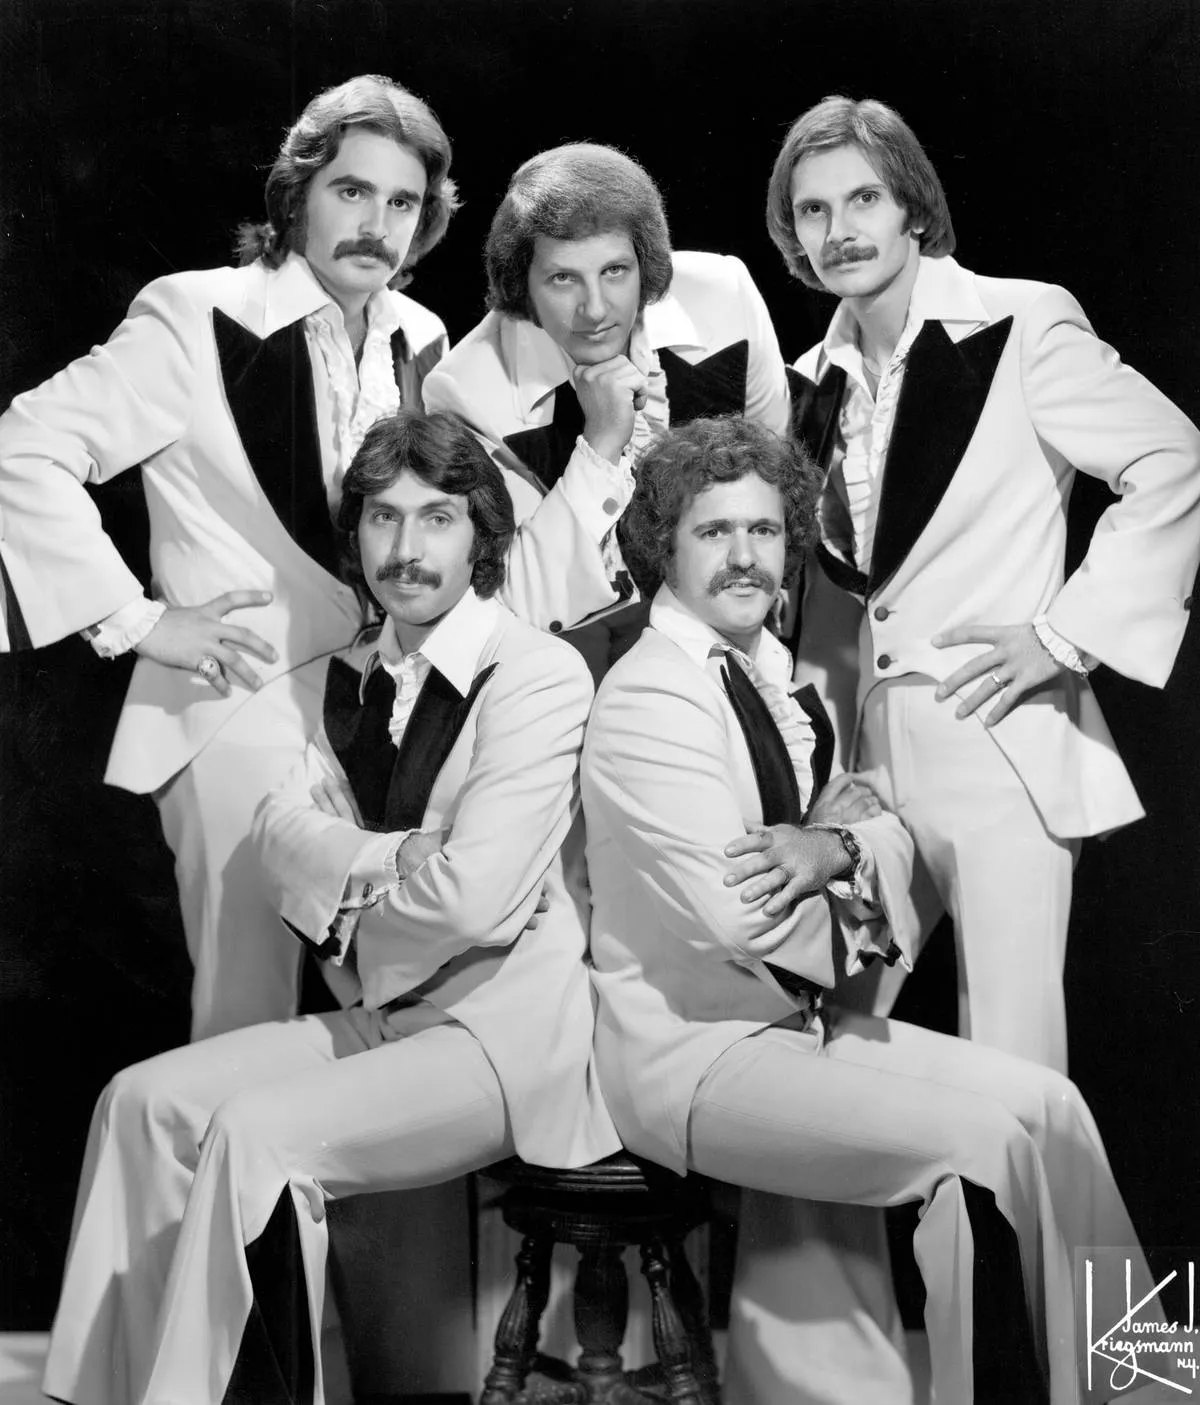 CIRCA 1972: Singer Johnny Maestro poses for a portrait with the members of his band 